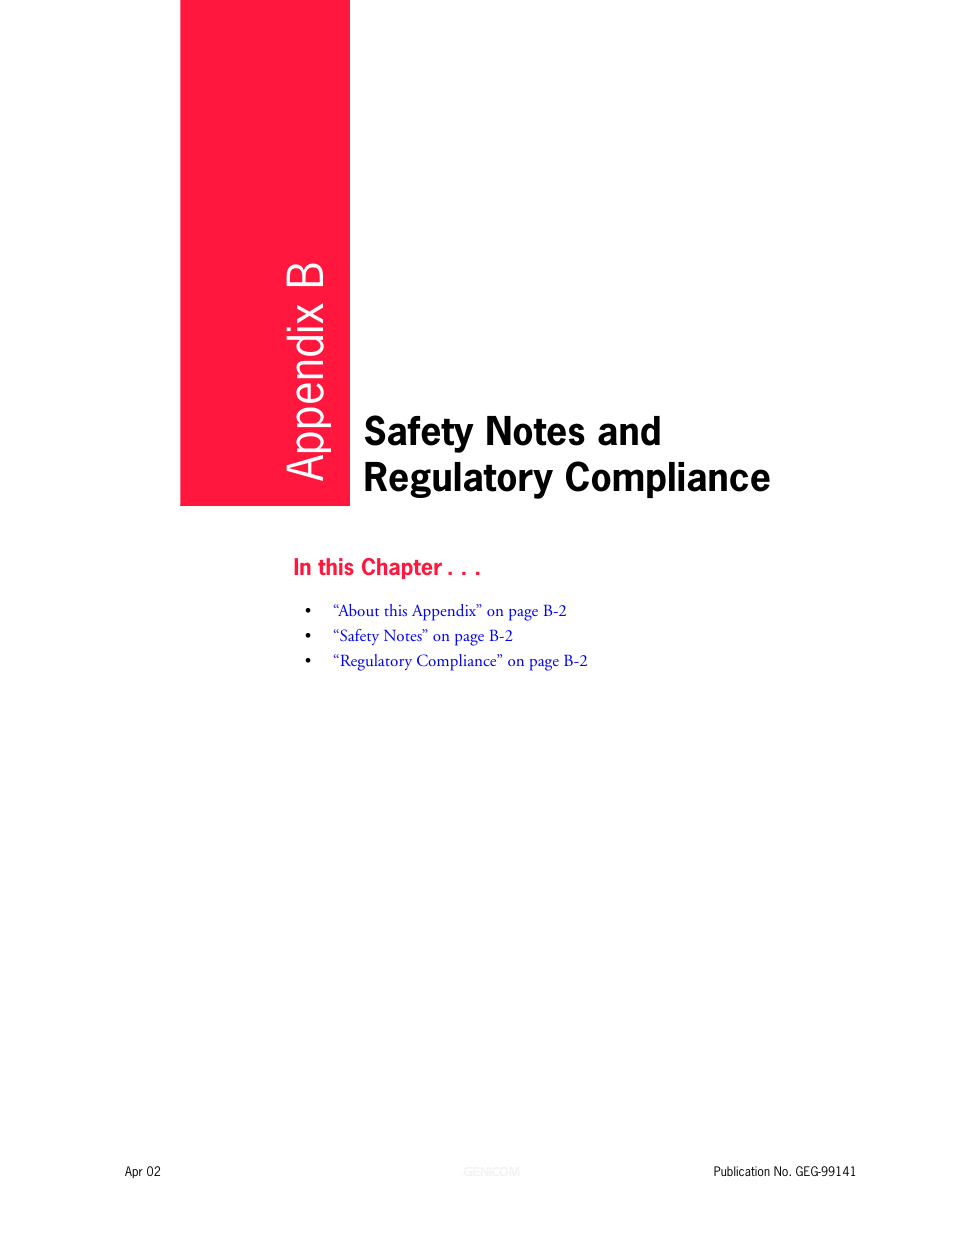 Safety notes and regulatory compliance, Appendix b, Safety notes and regulatory compliance b-1 | Genicom cL160 User Manual | Page 195 / 216